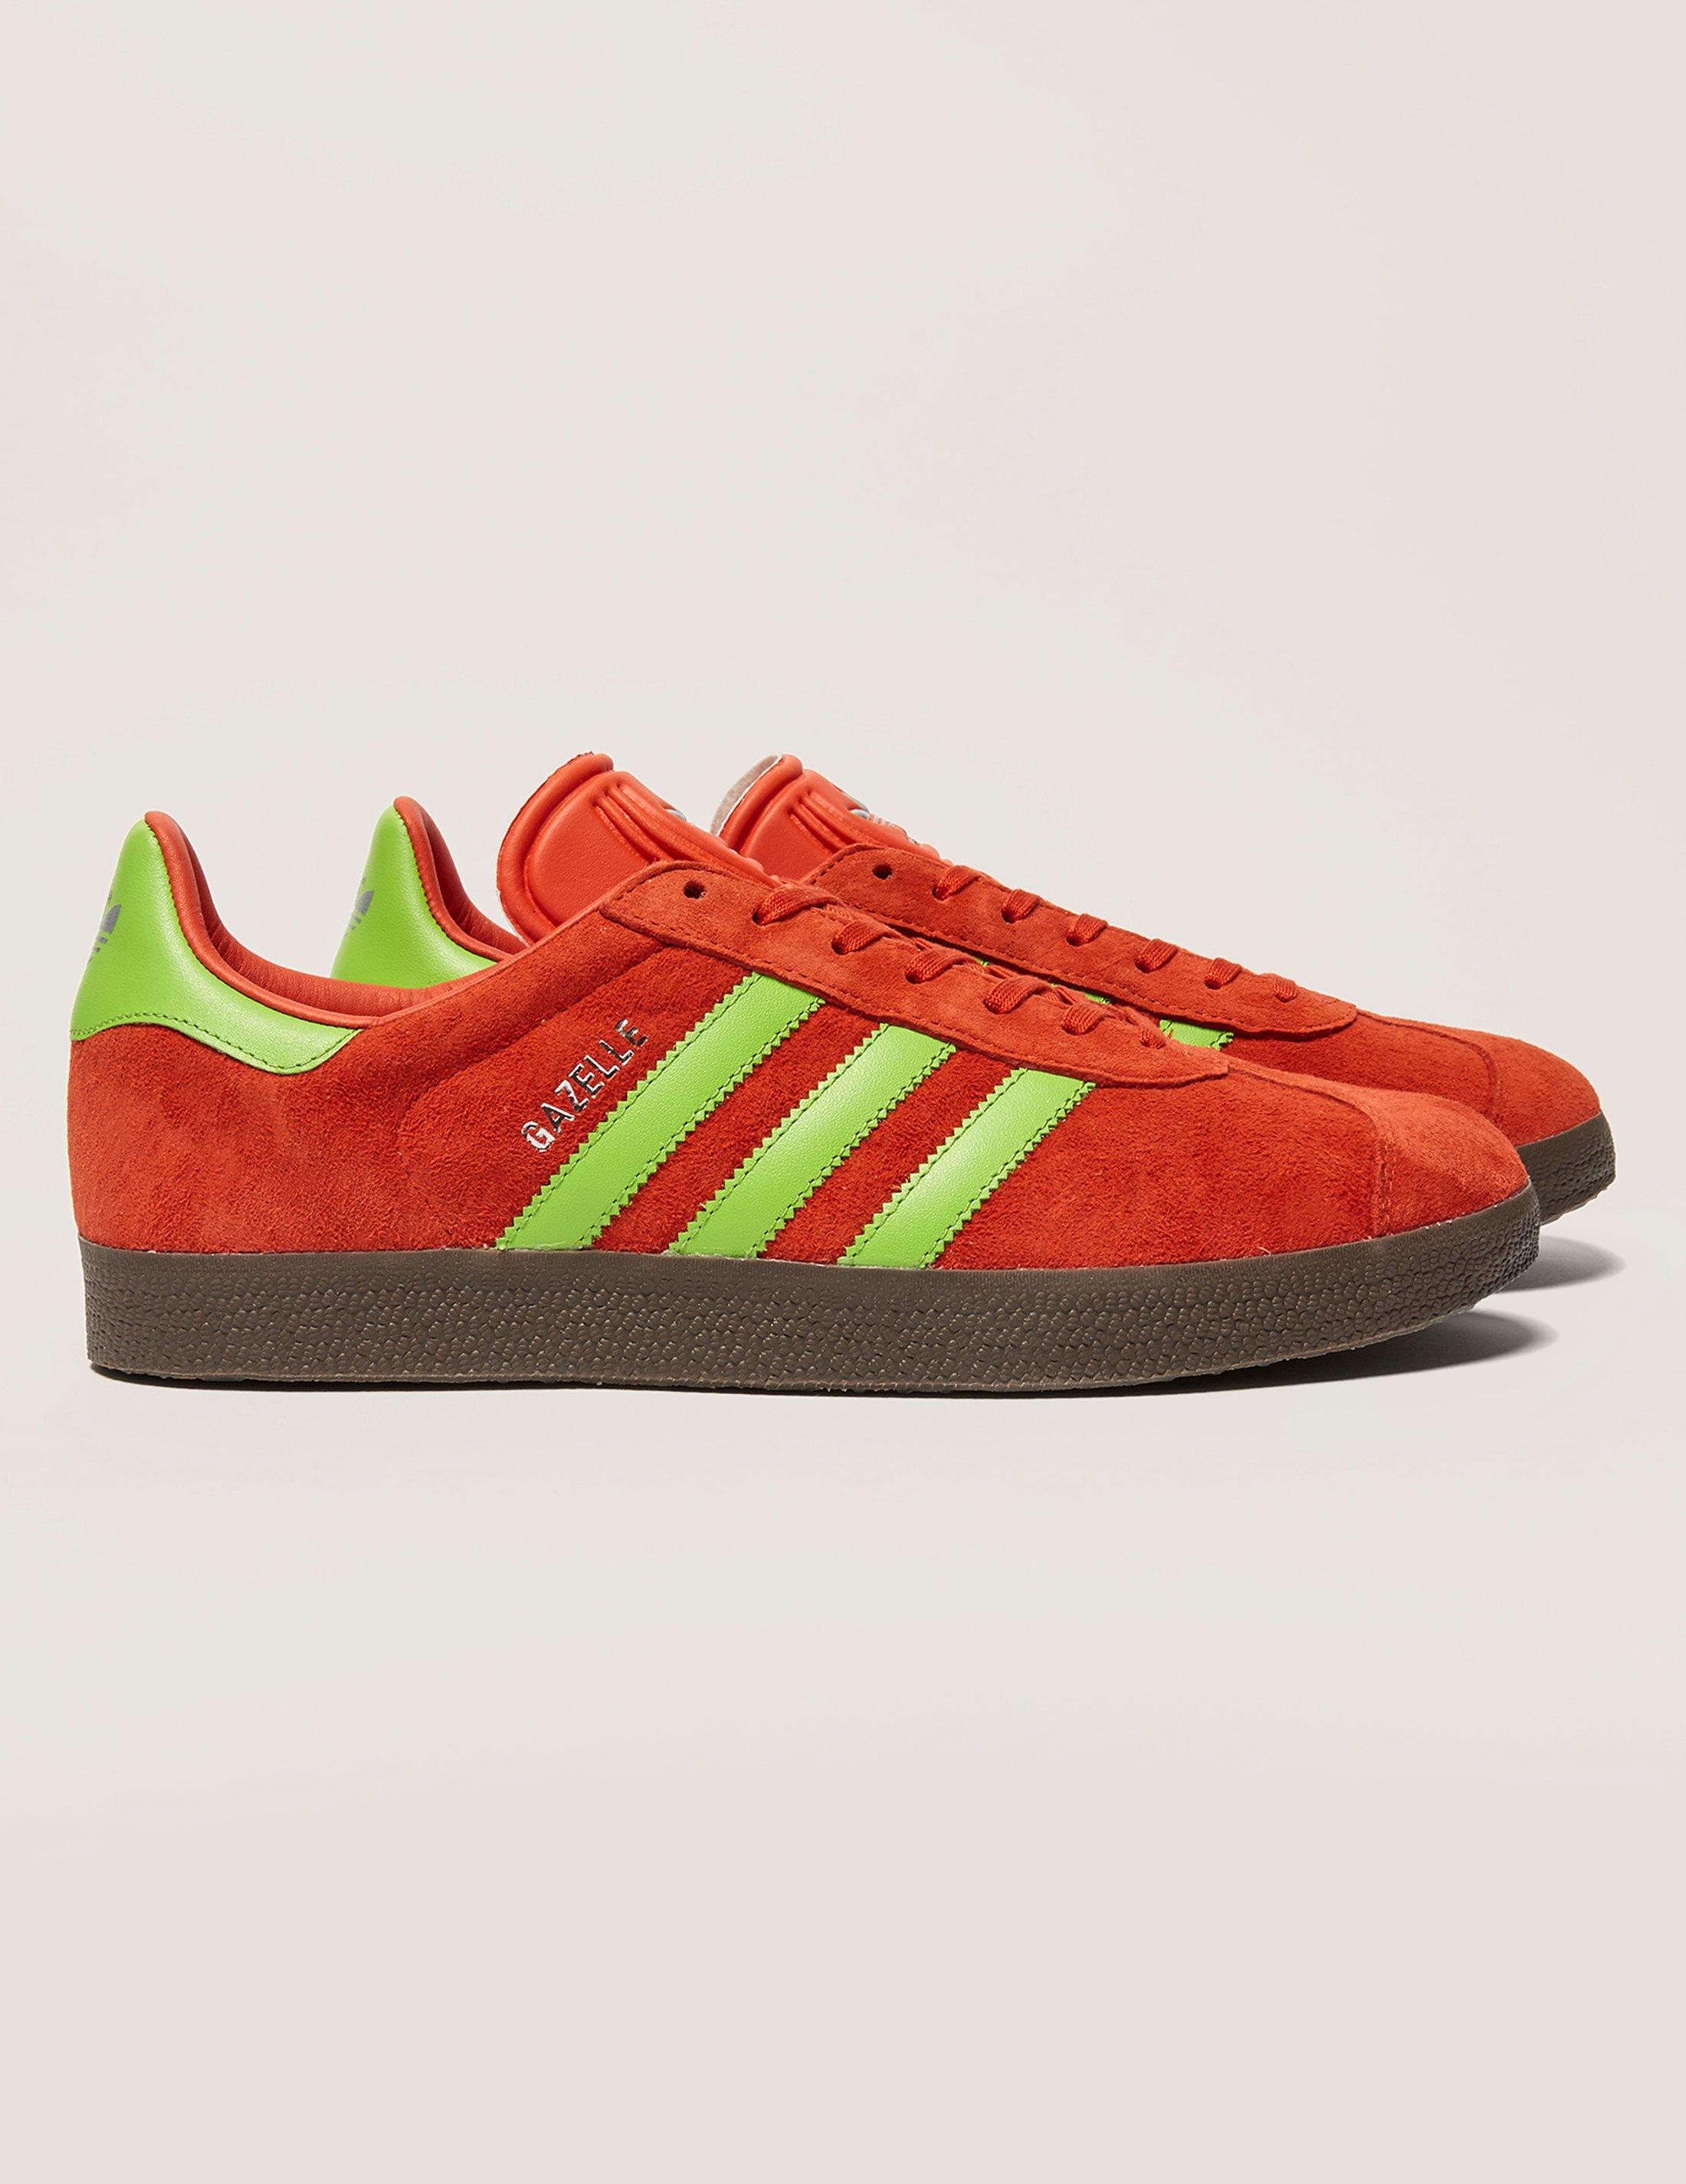 adidas gazelle red and green